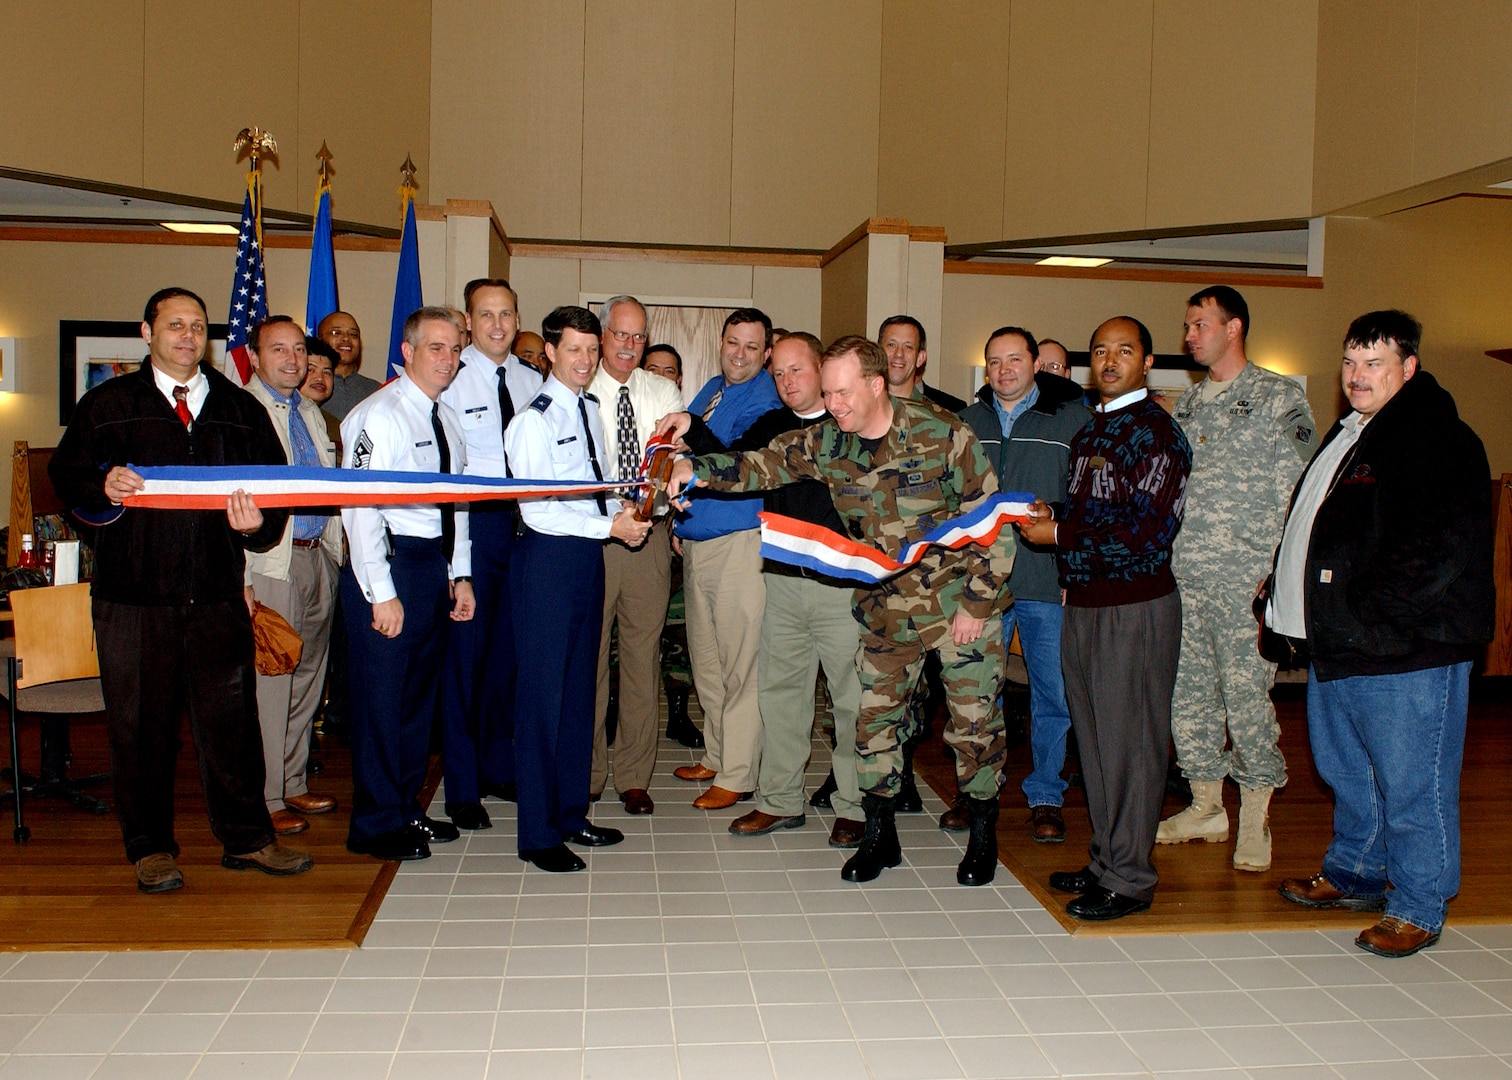 37th Training Wing and Services Division leadership, lead by Brig. Gen. Darrell Jones, then the 37th TRW commander, gather for the ceremonial ribbon cutting Jan. 24, 2007, at the new dining facility on the Lackland Training Annex at Lackland Air Force Base, Texas. (USAF photo by Alan Boedeker)                               